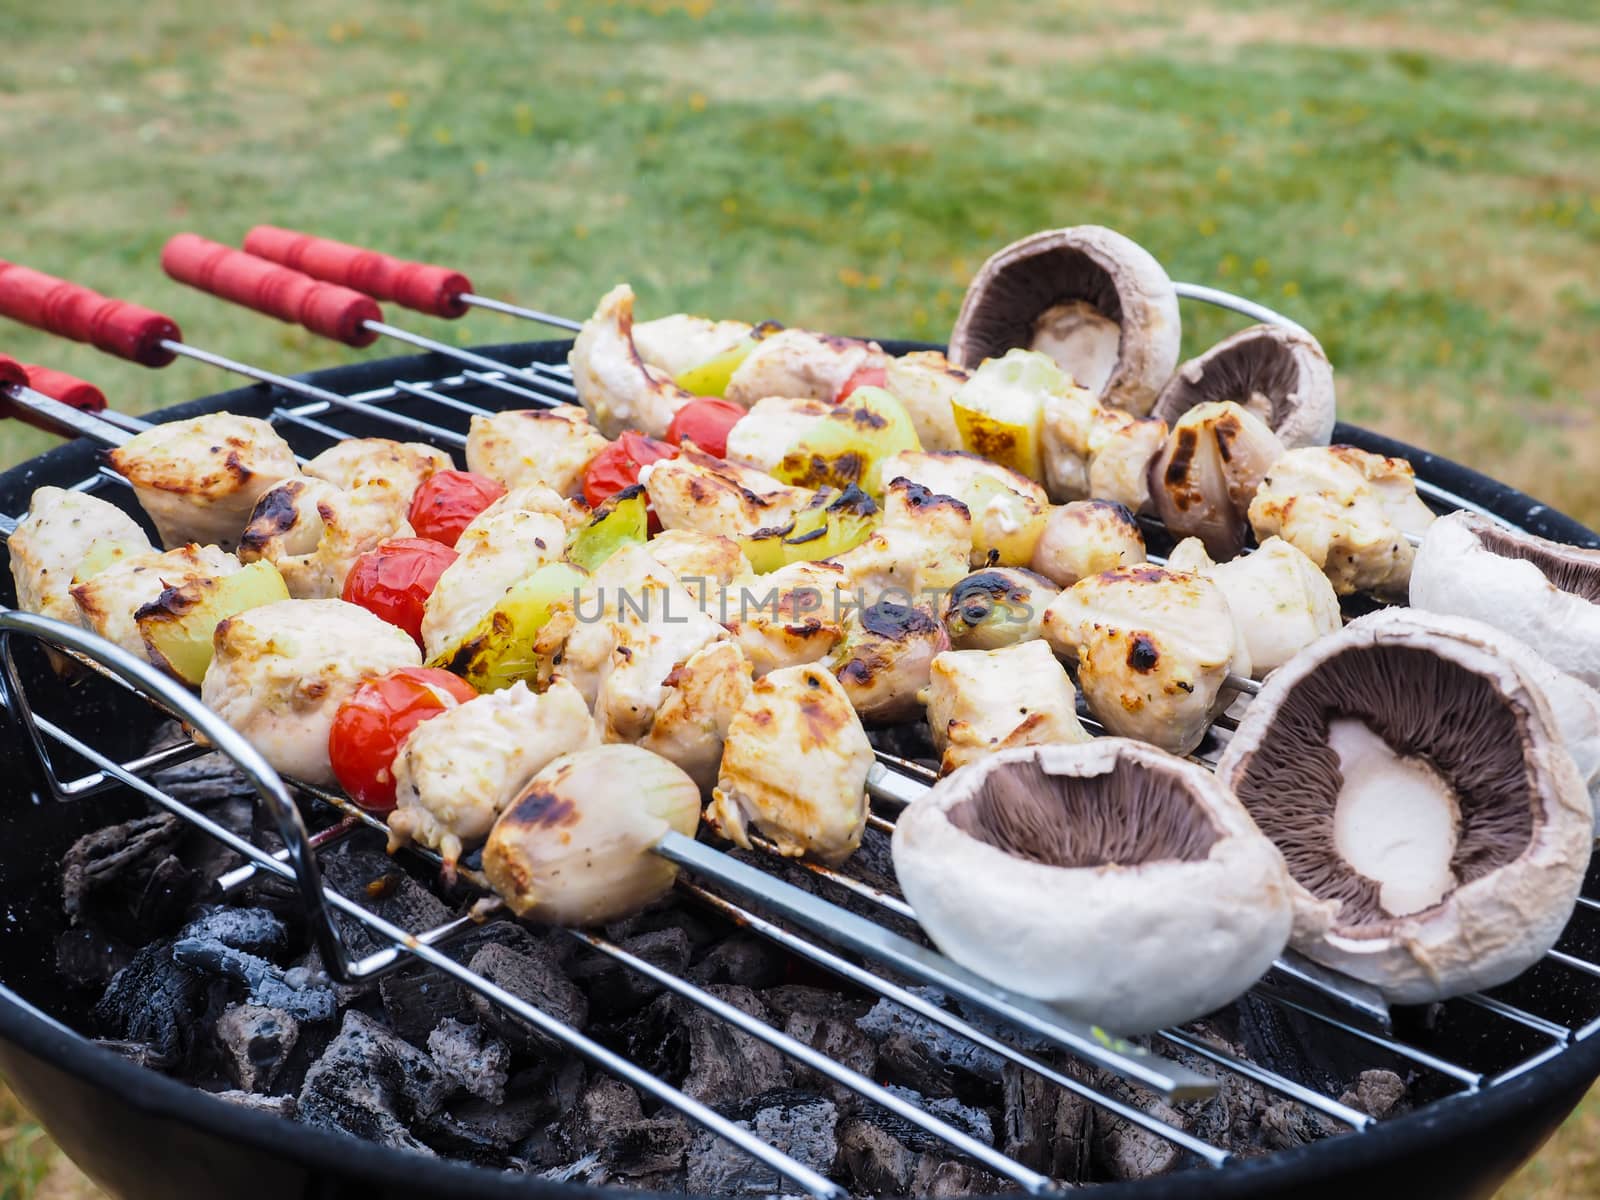 Barbecuing chicken, vegetables and champignon on spear over char by Arvebettum